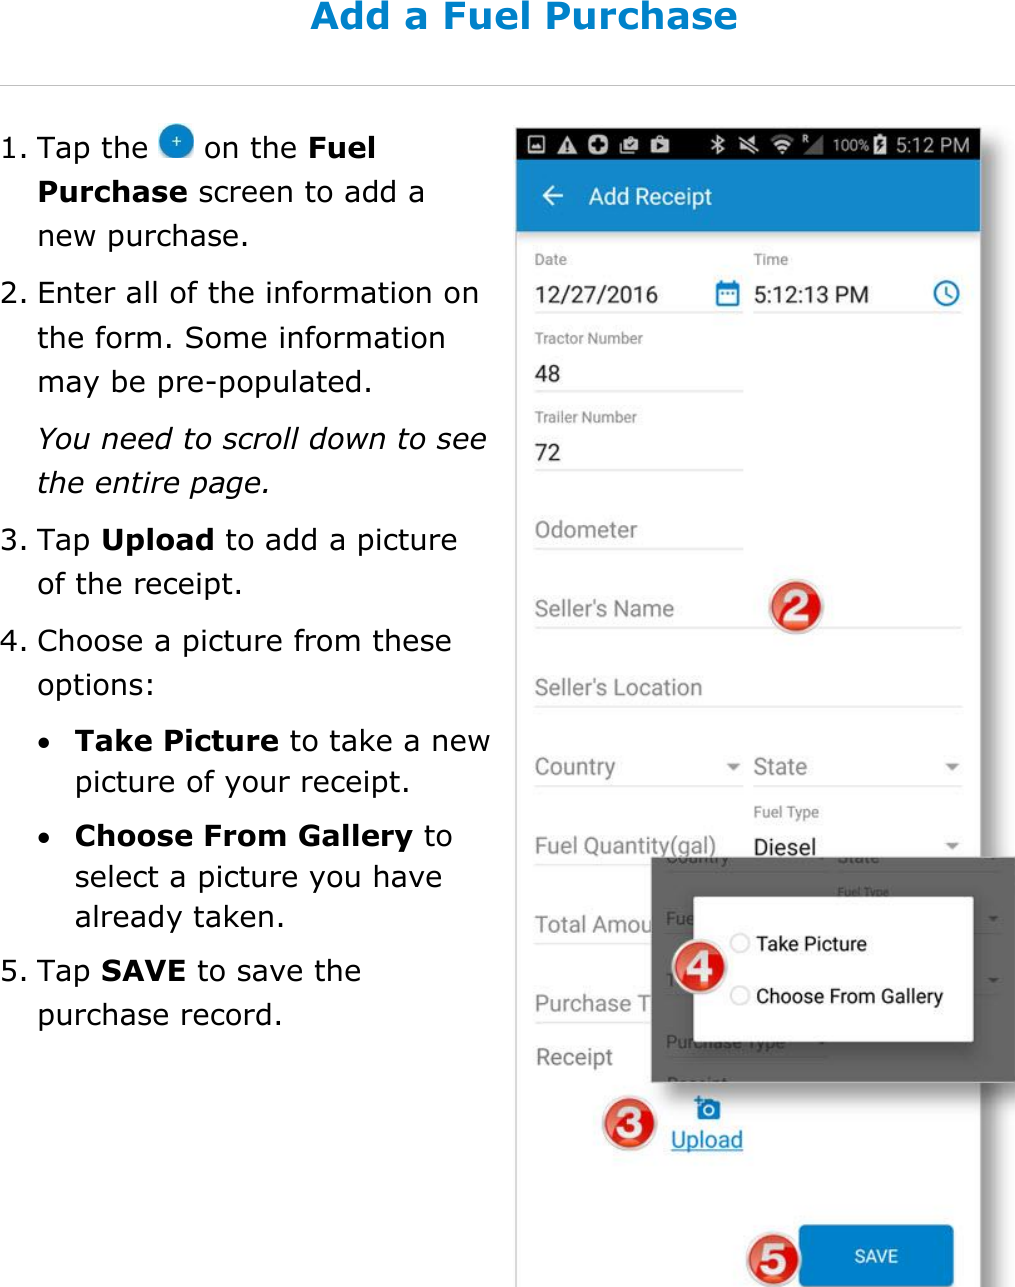 Manage Fuel Purchases DriverConnect User Guide  50 © 2016-2017, Rand McNally, Inc. Add a Fuel Purchase 1. Tap the   on the Fuel Purchase screen to add a new purchase. 2. Enter all of the information on the form. Some information may be pre-populated. You need to scroll down to see the entire page. 3. Tap Upload to add a picture of the receipt. 4. Choose a picture from these options:  Take Picture to take a new picture of your receipt.  Choose From Gallery to select a picture you have already taken. 5. Tap SAVE to save the purchase record.    